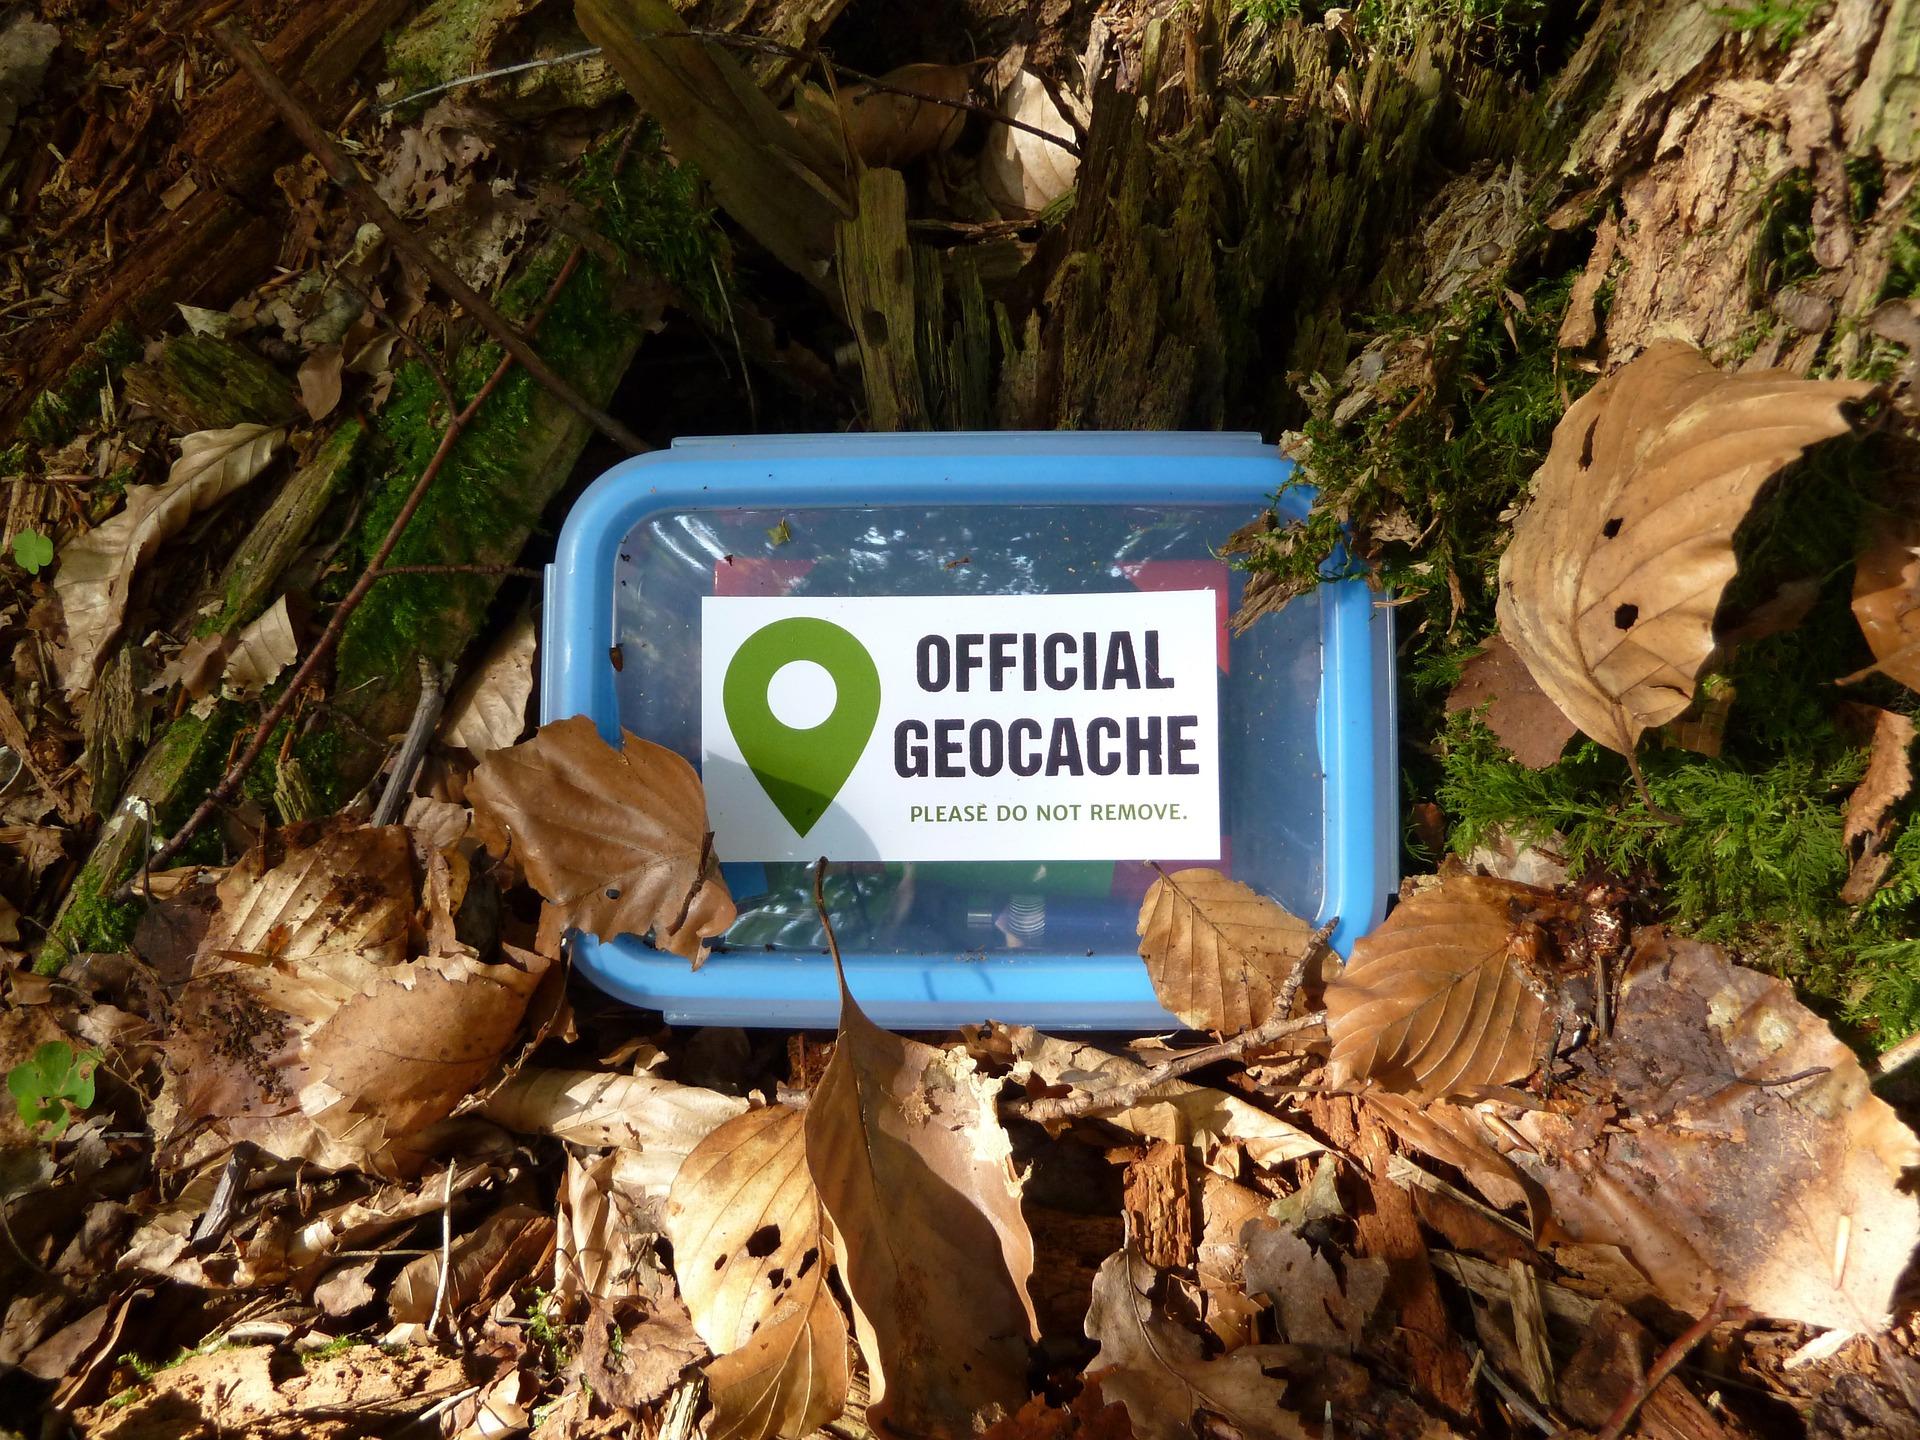 Image of a geocache container in the woods